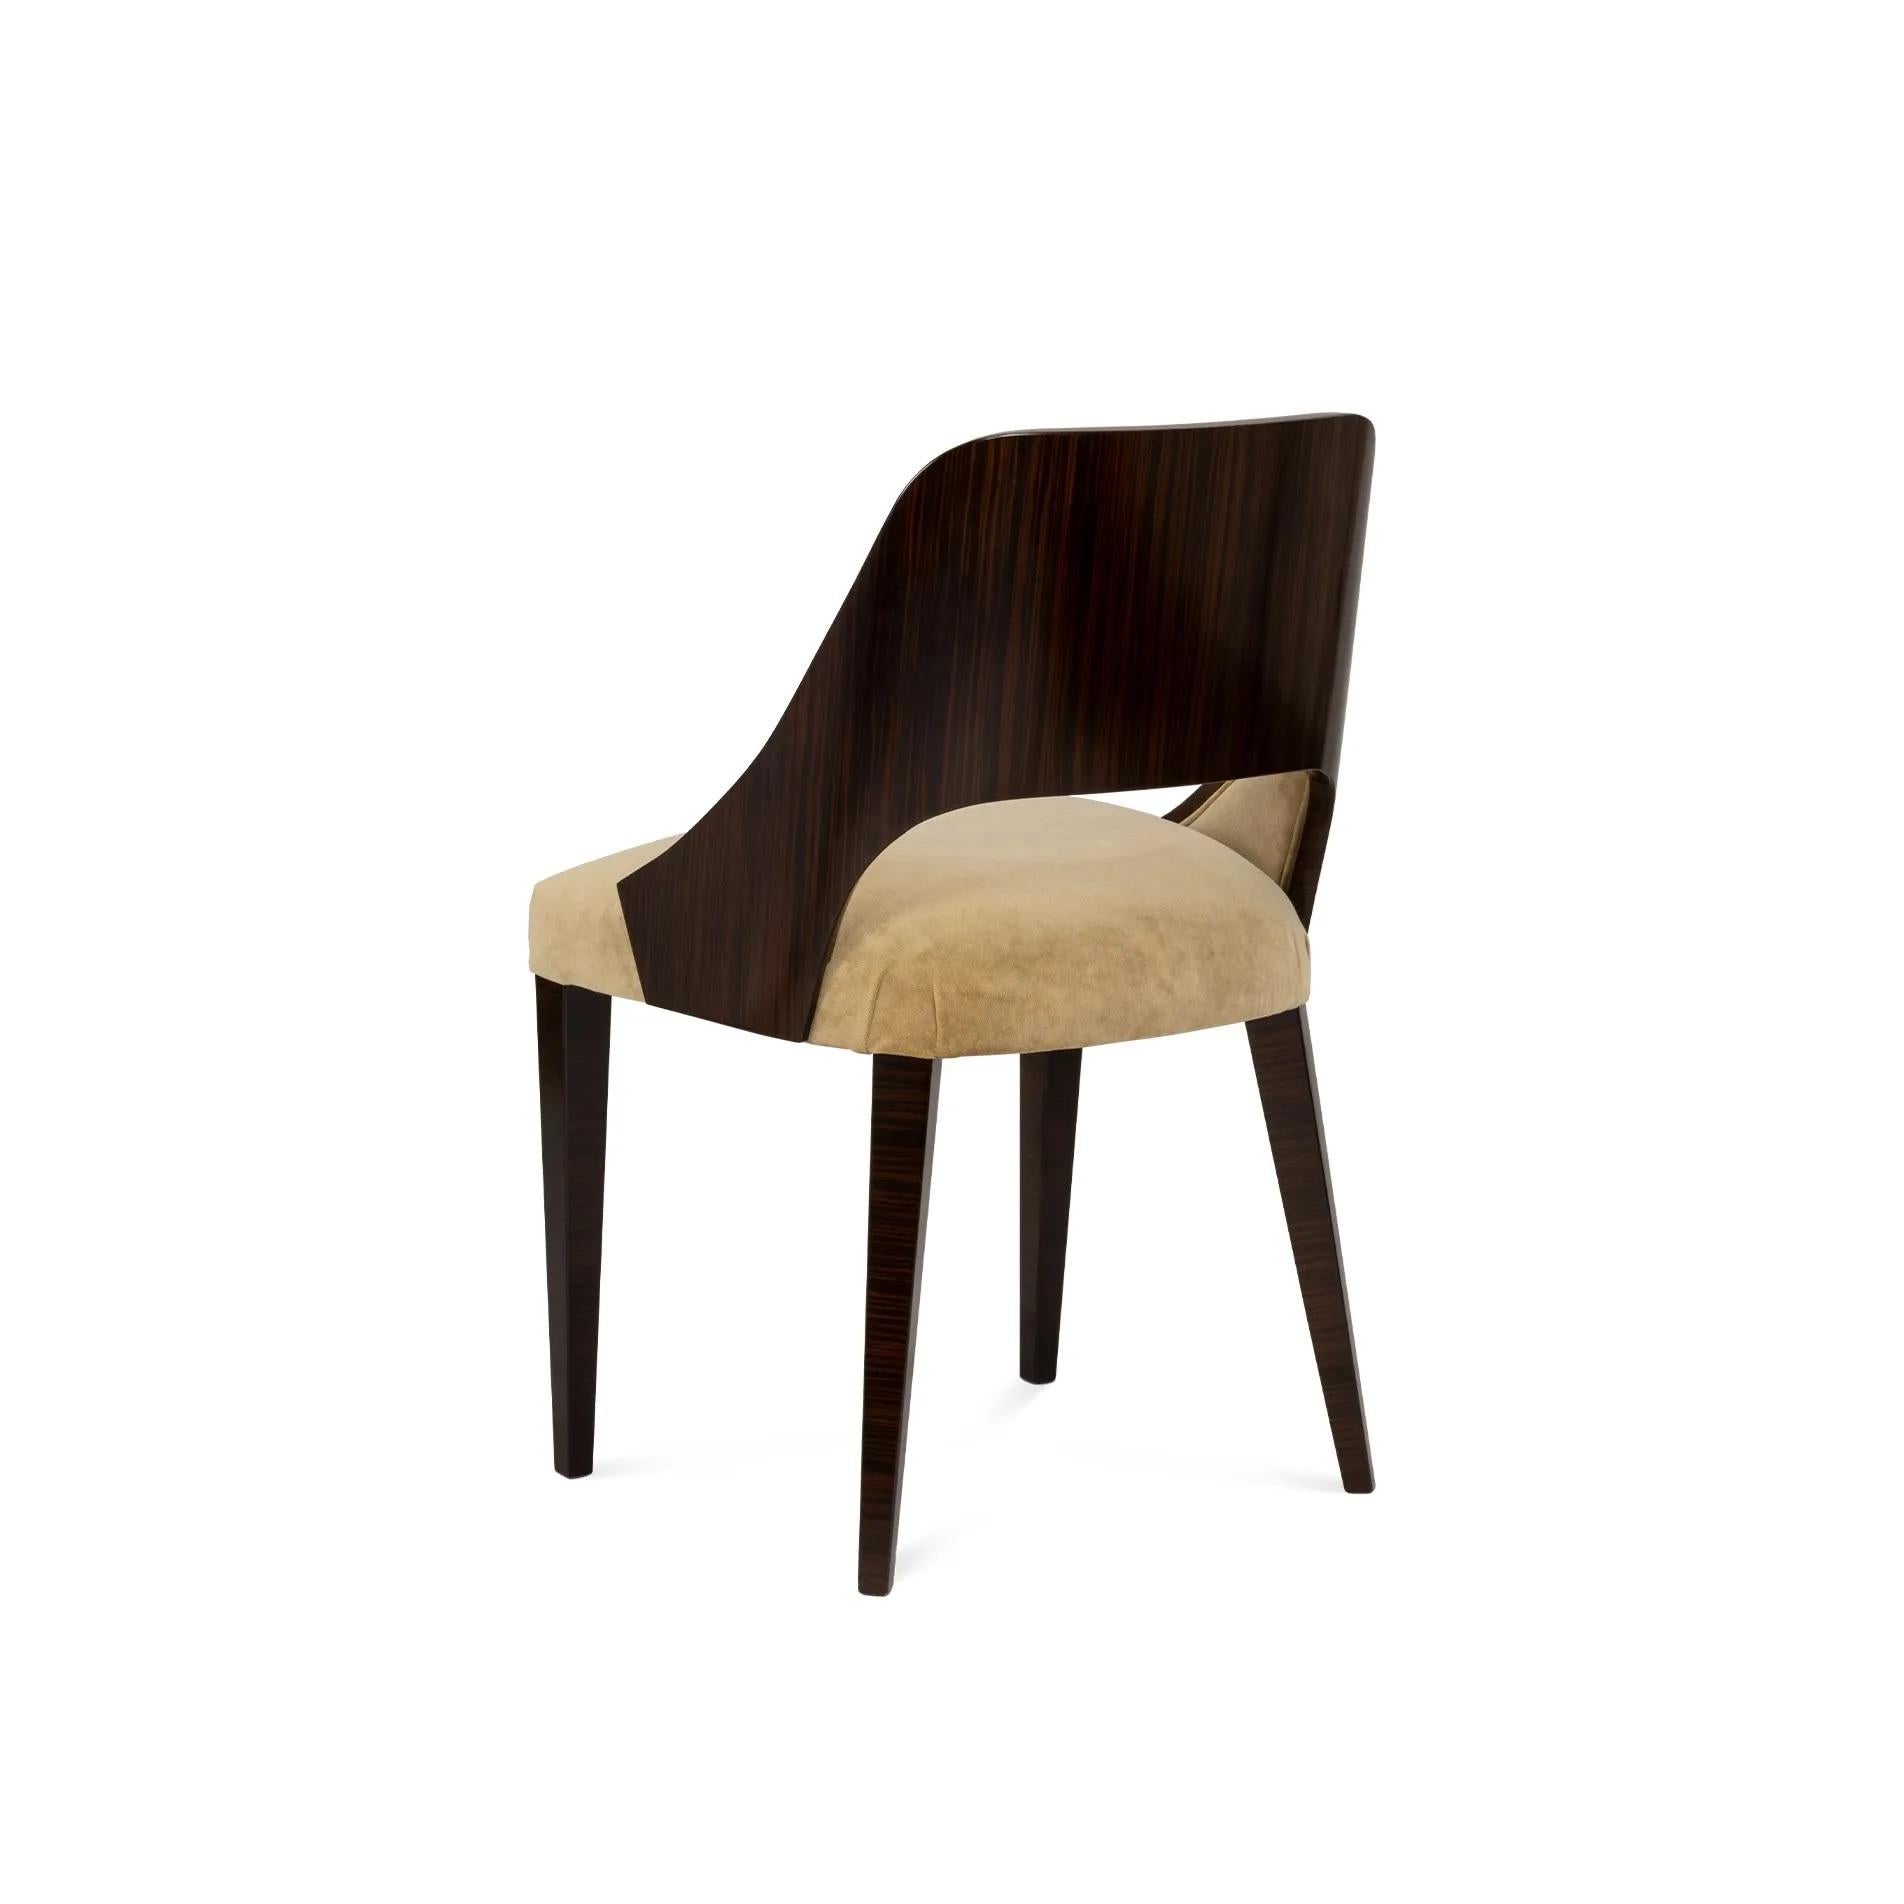 Crafted for comfort and class, this upholstered chair blends plush velvet with a sleek ebony wood frame. The dark wood legs, like sturdy pillars, support a seat made for lingering conversations. A timeless piece to elevate any room.
Custom sizes and